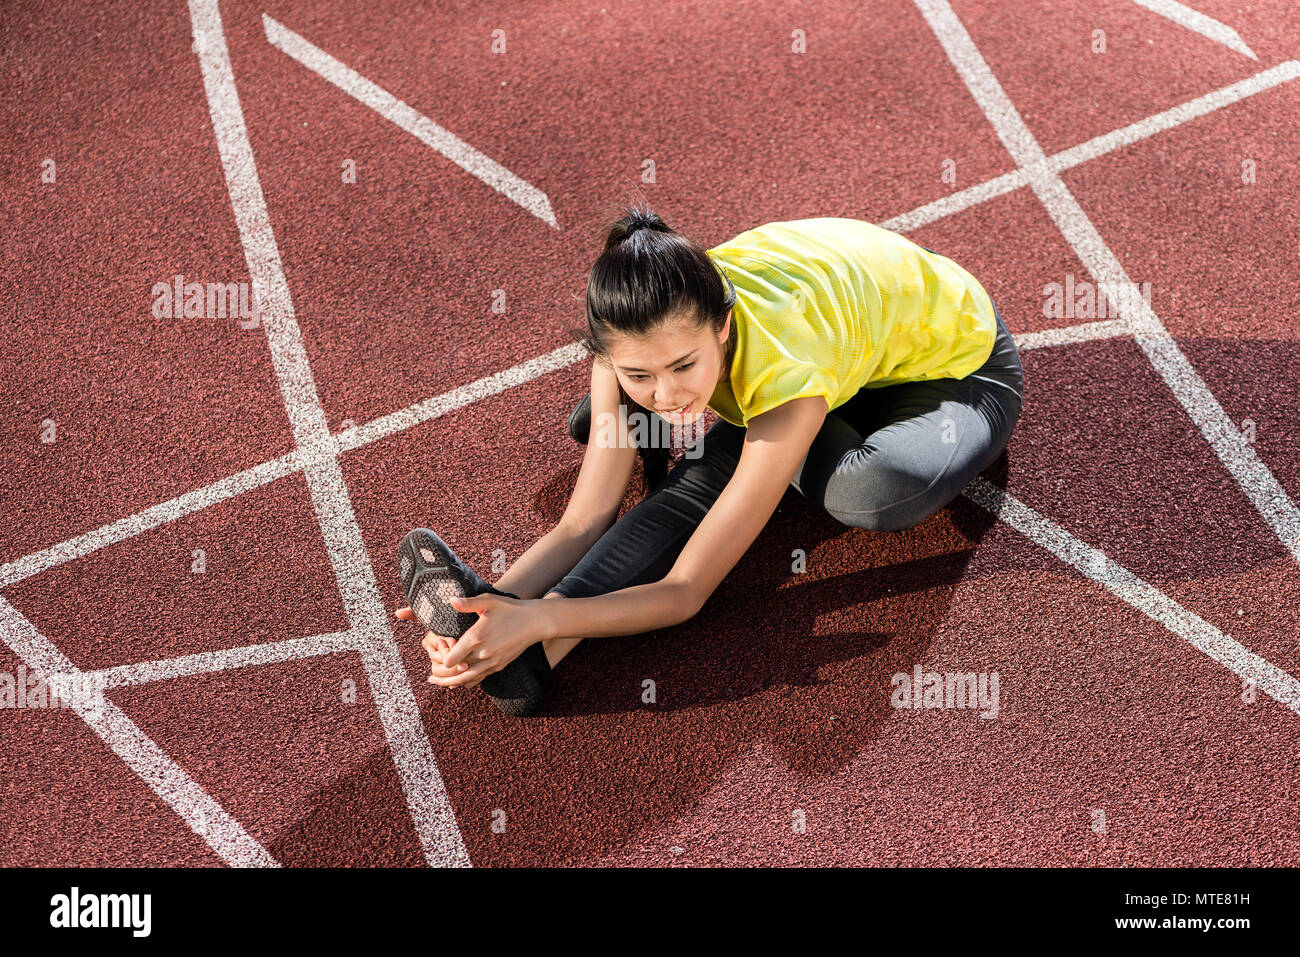 Woman sprinter doing warm up exercise before sprint Stock Photo